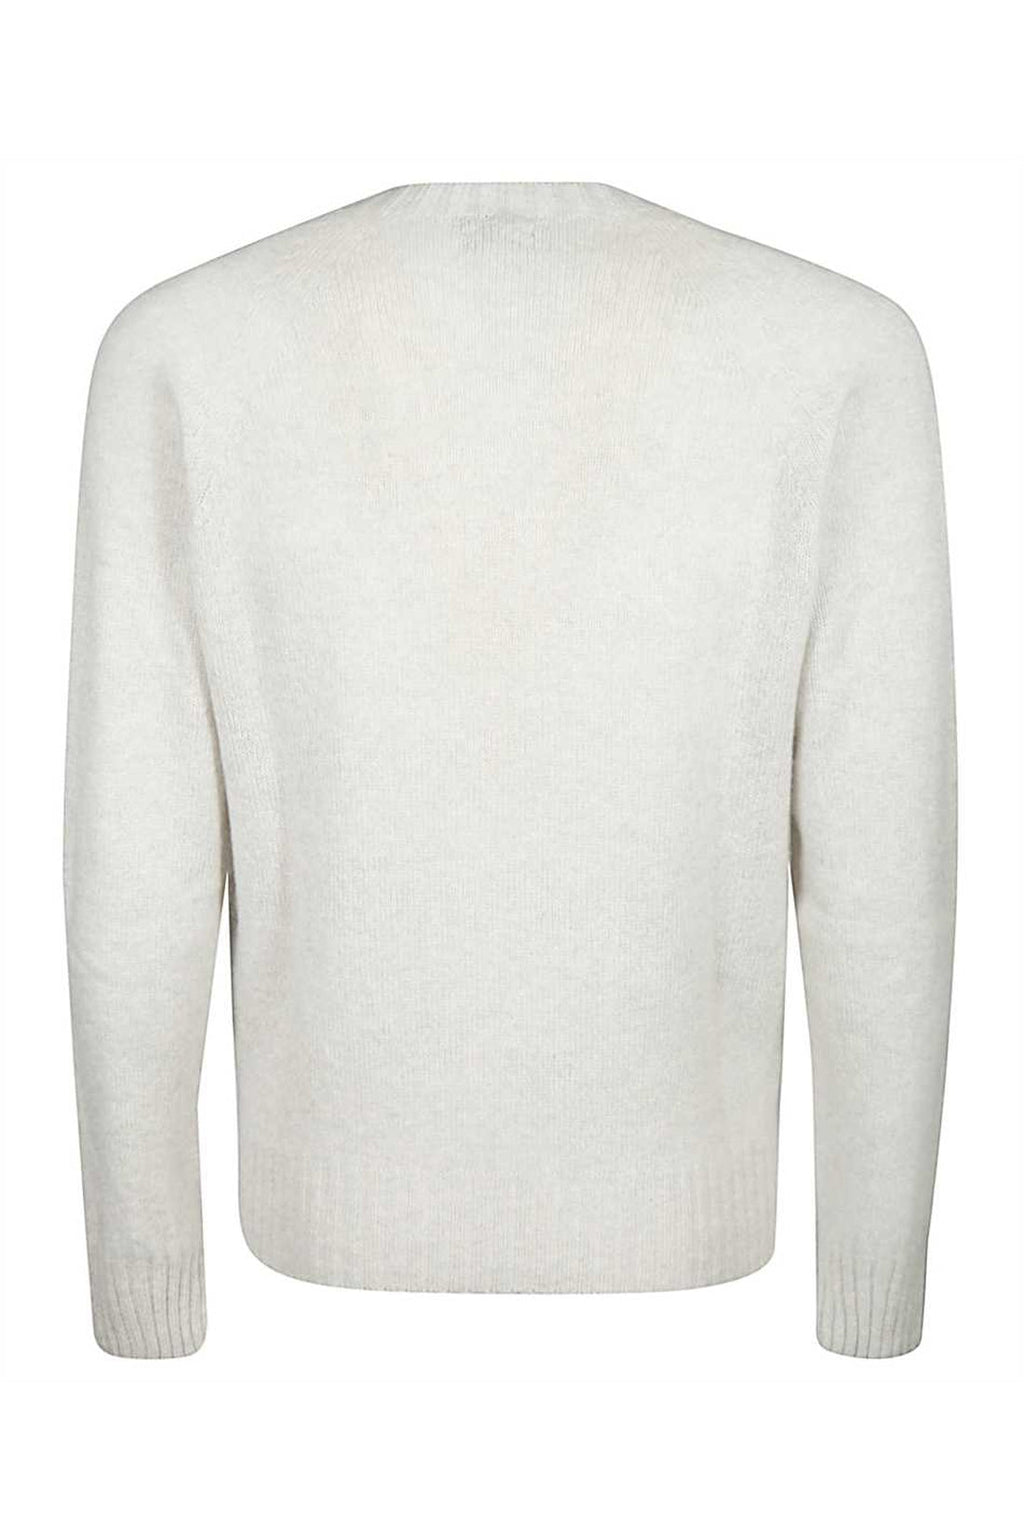 Tom Ford-OUTLET-SALE-Cashmere crew-neck sweater-ARCHIVIST